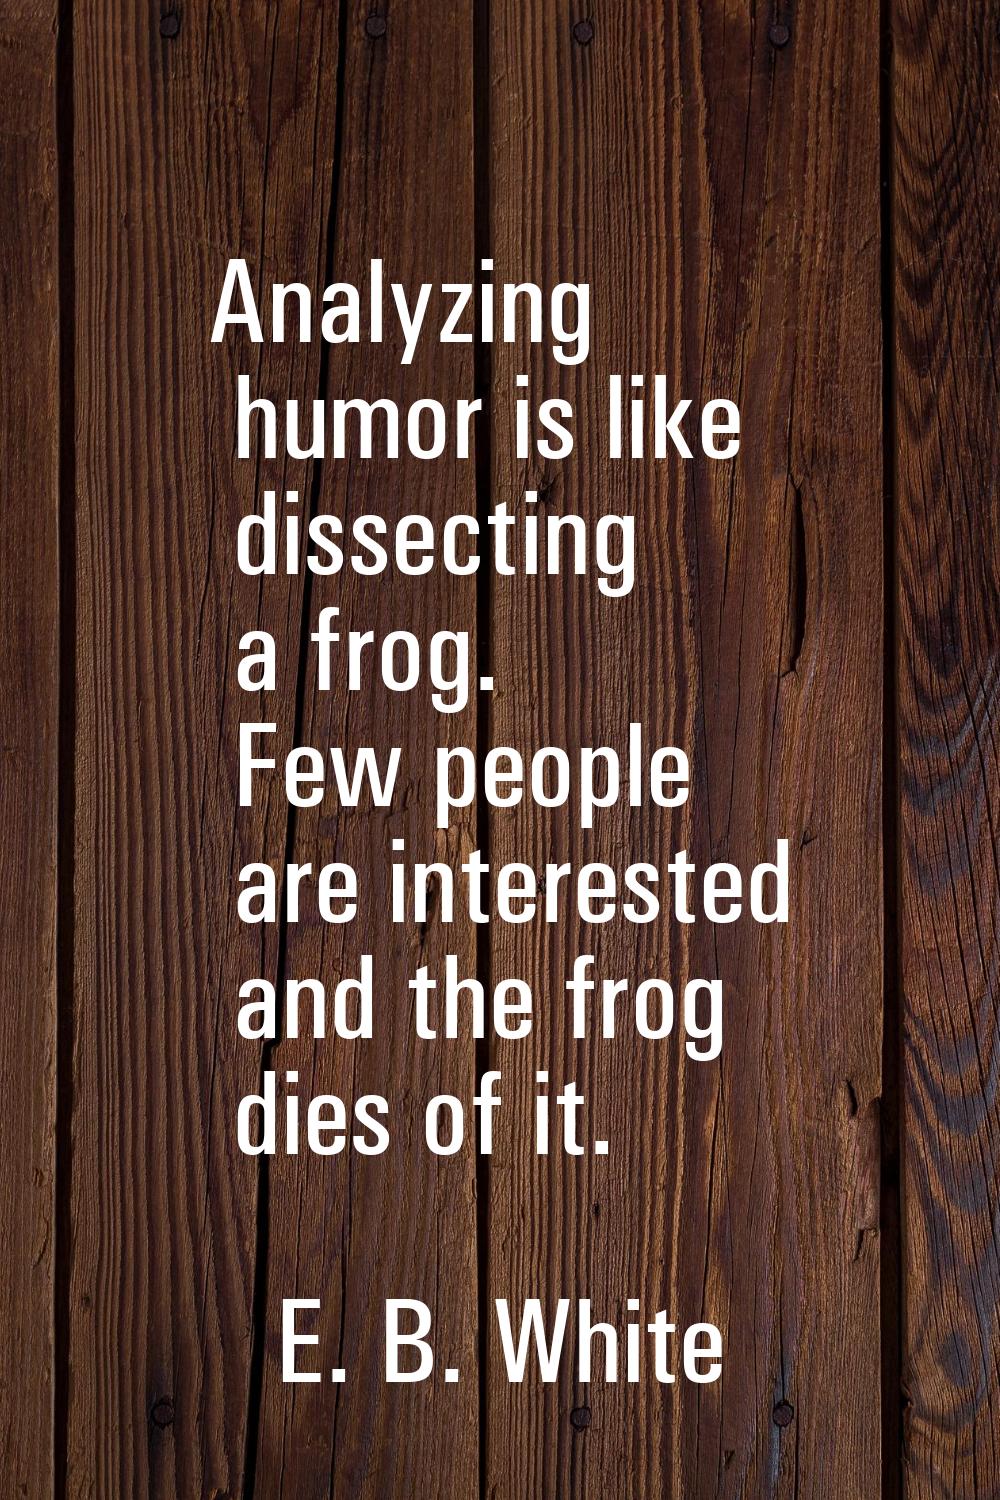 Analyzing humor is like dissecting a frog. Few people are interested and the frog dies of it.